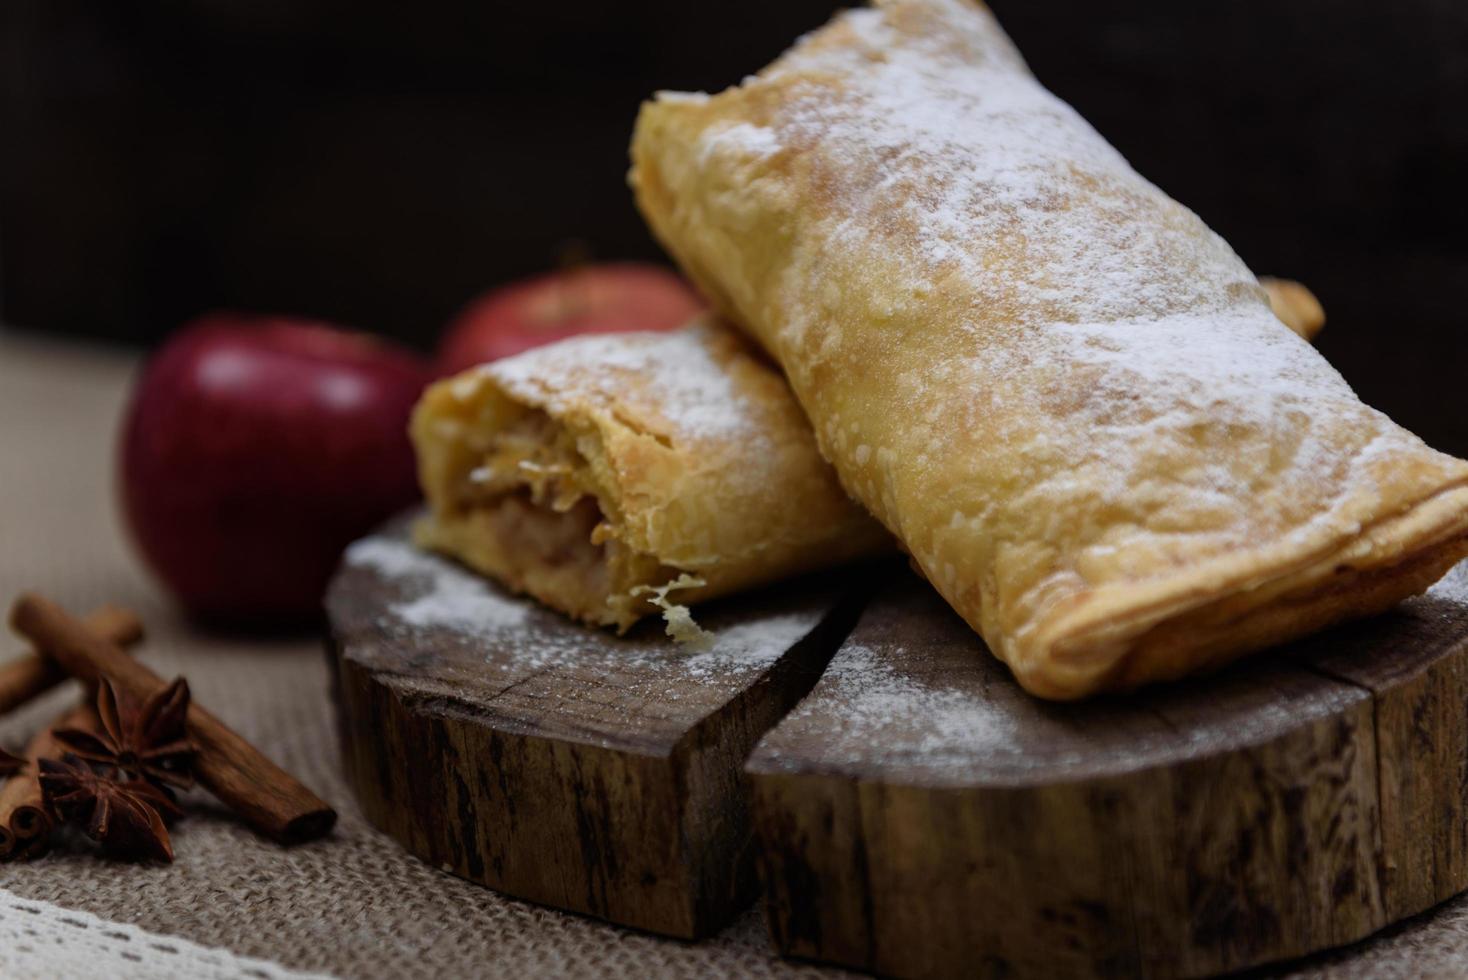 Apple strudel on wooden end of a tree with apples, cinnamon and star anise photo